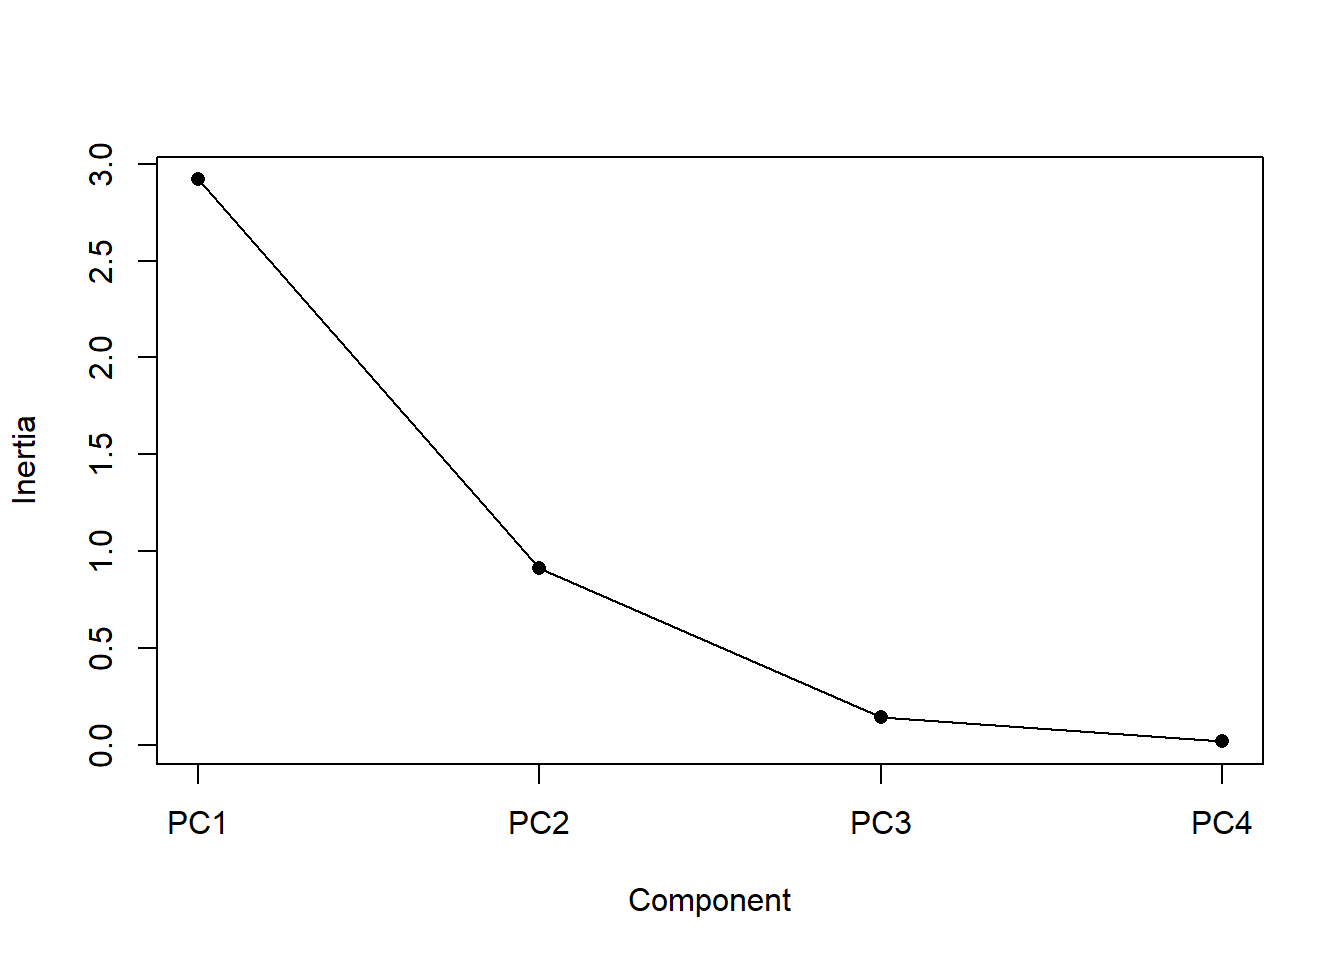 The relationship between variances and the number of axes that explain the dataset. As the number of axes increases from 1 to 4, the variances decrease from 3 to 0.